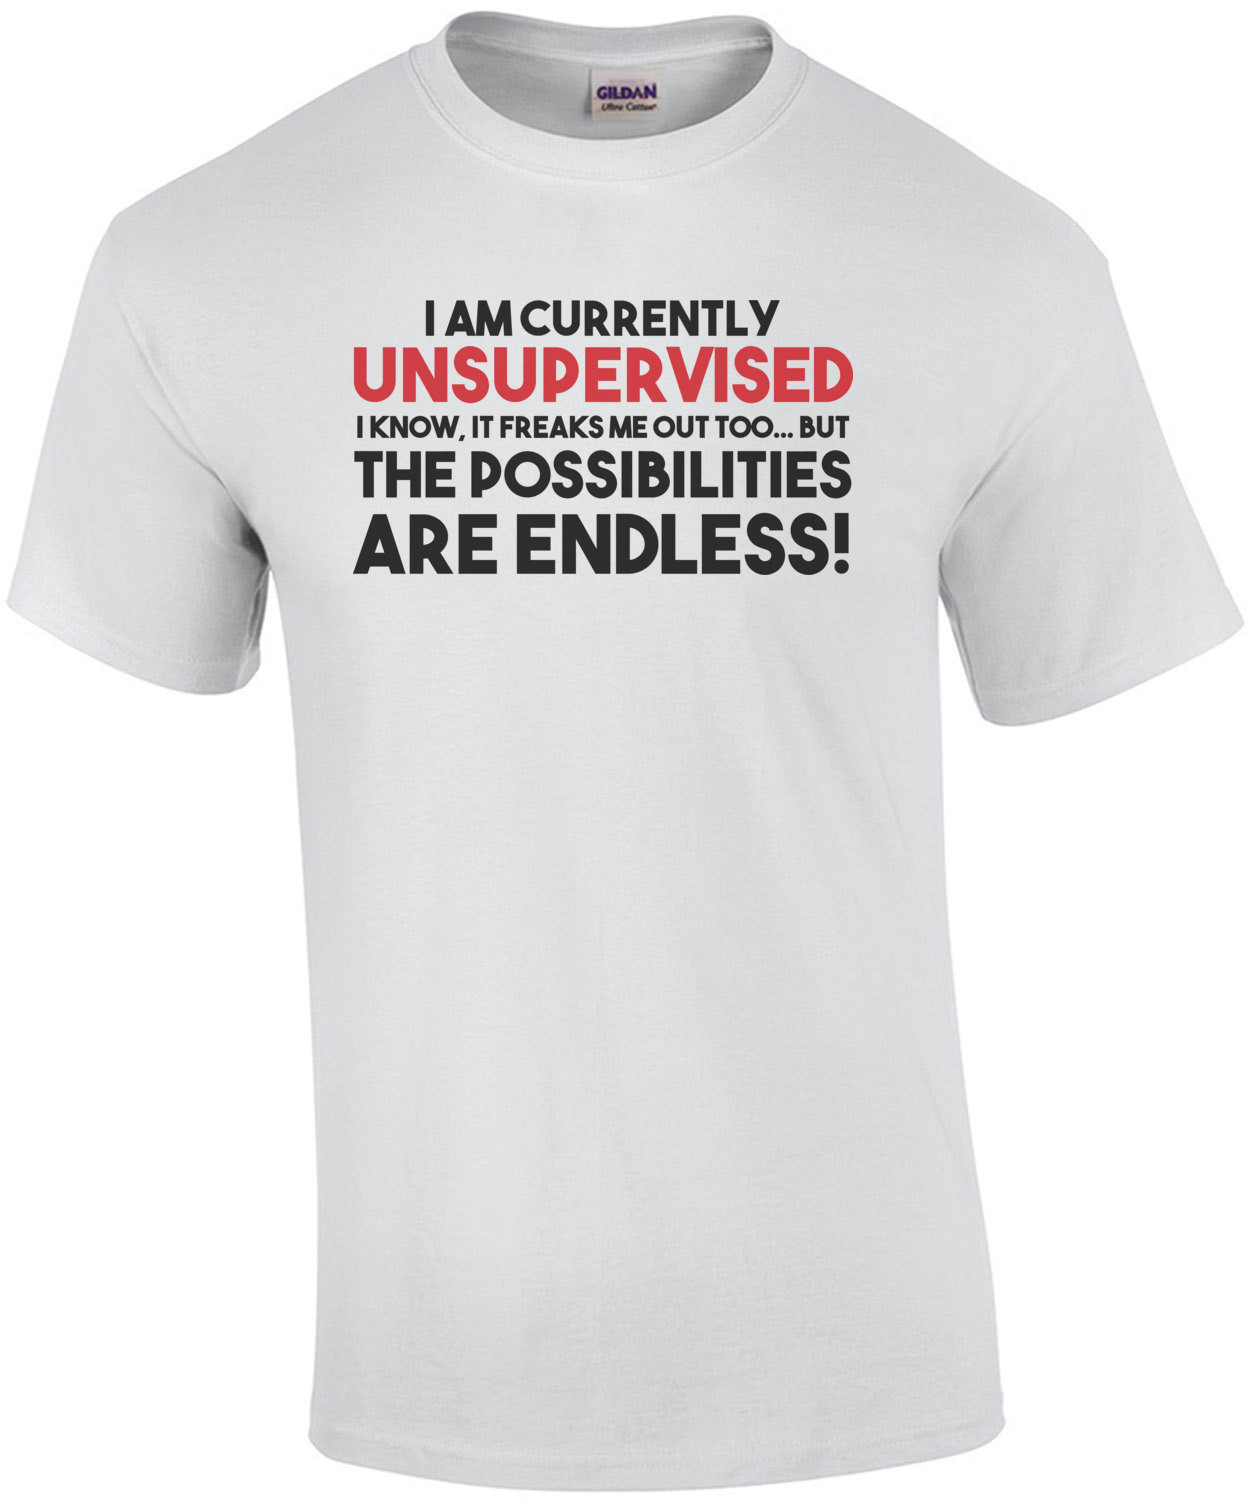 I AM CURRENTLY UNSUPERVISED. I KNOW, IT FREAKS ME OUT TOO. BUT THE POSSIBILITIES ARE ENDLESS! Shirt